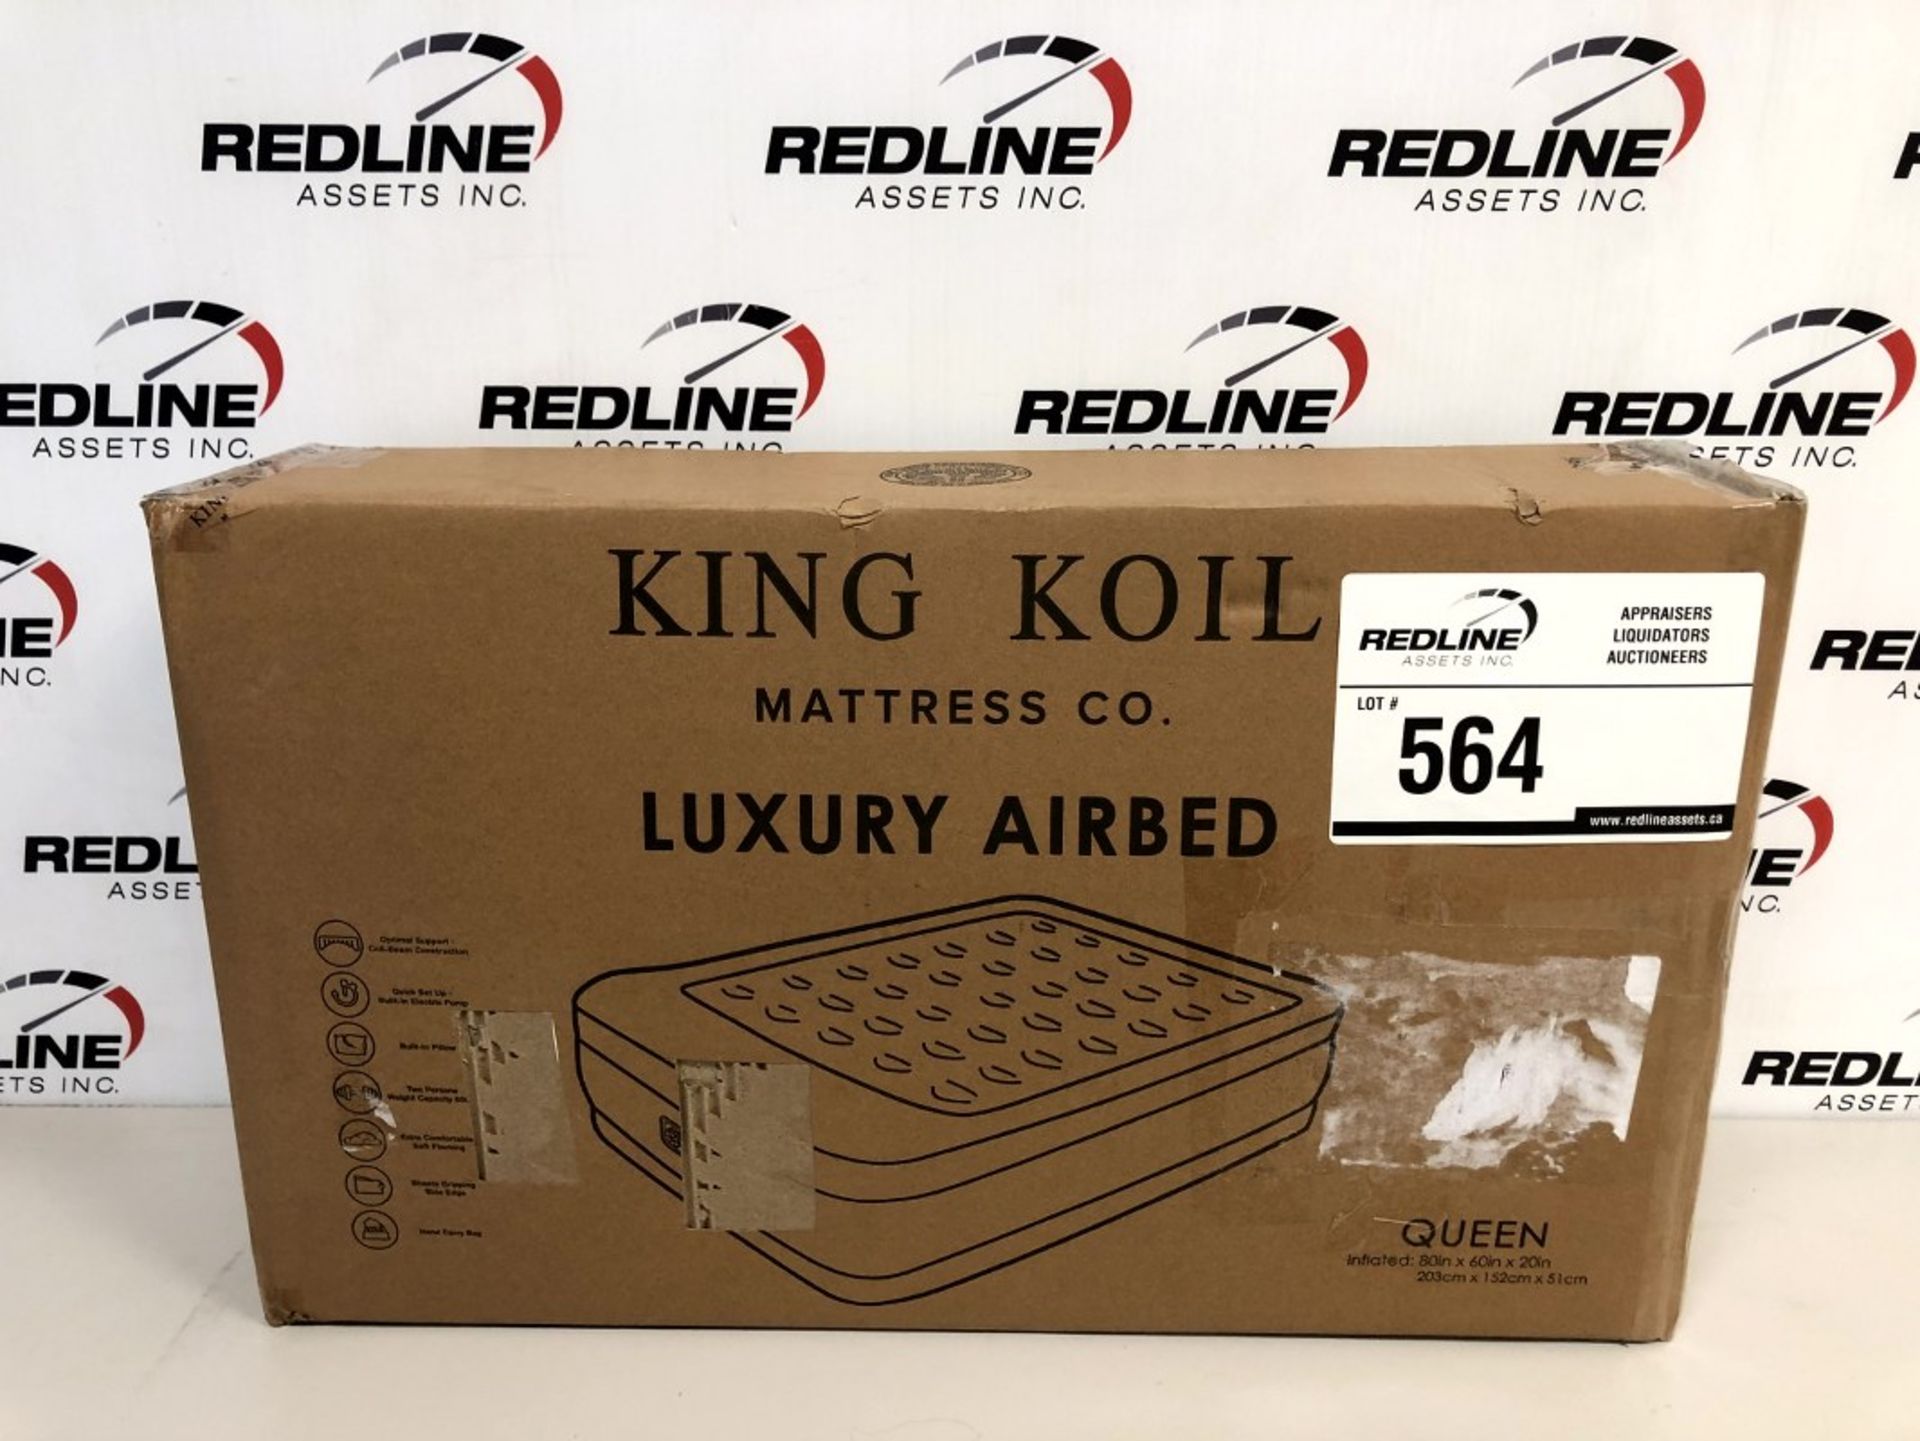 King Koil Matress Co. - Luxury Airbed